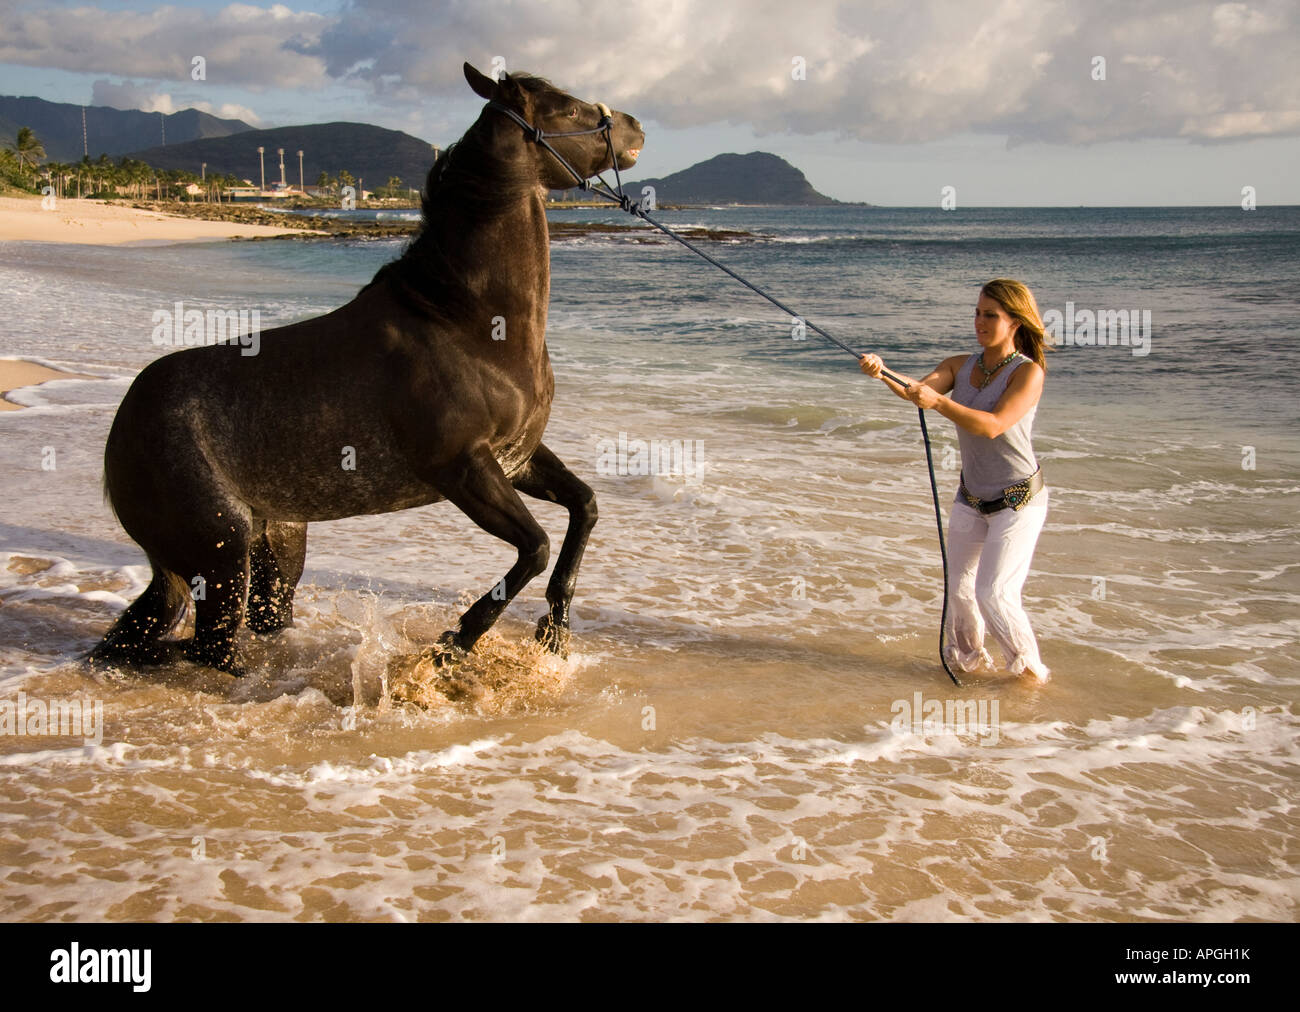 Woman and rearing horse on beach Stock Photo